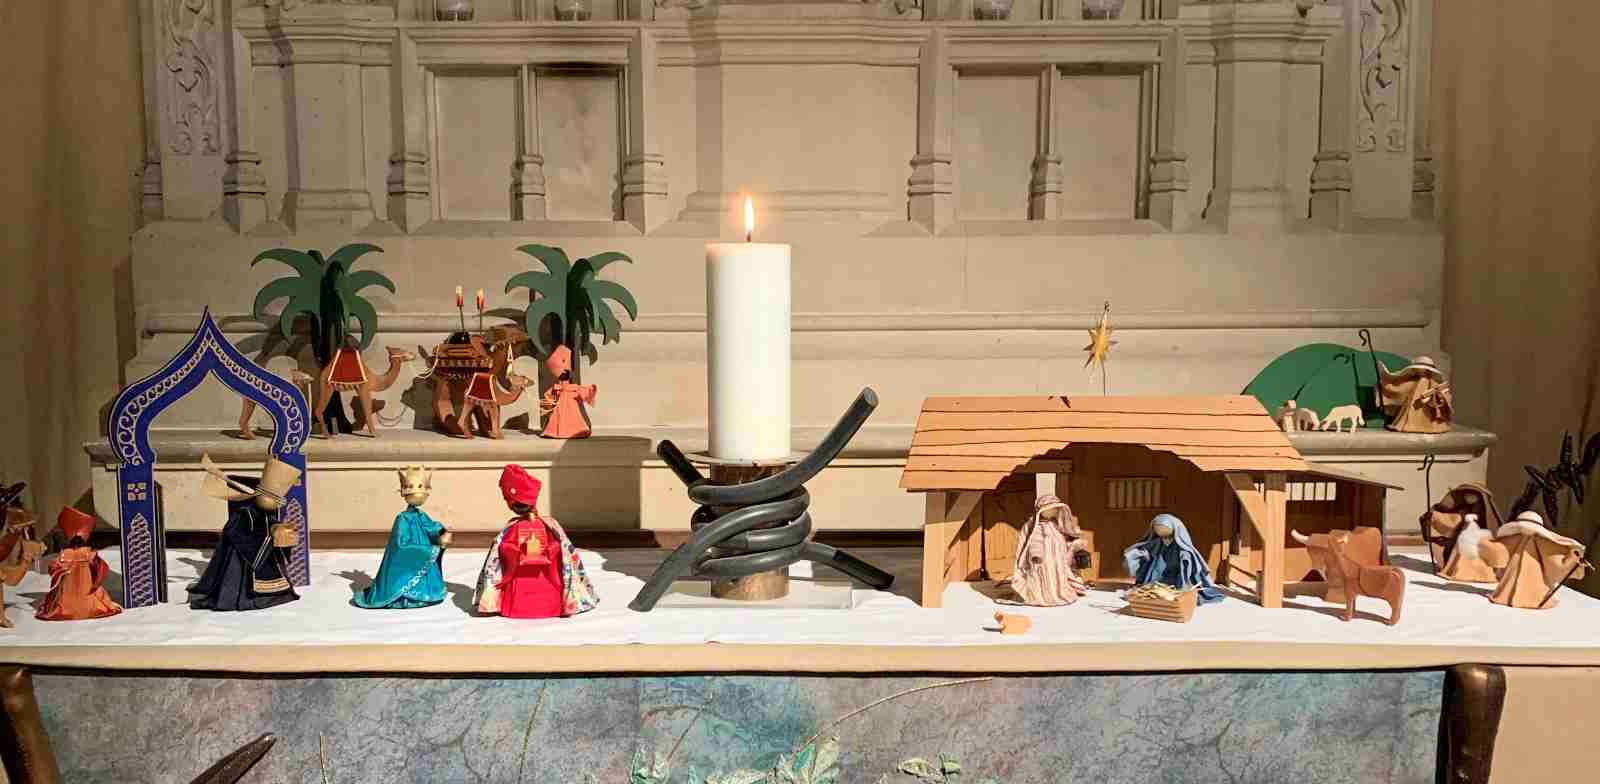 A nativity scene with a candle and wooden figures